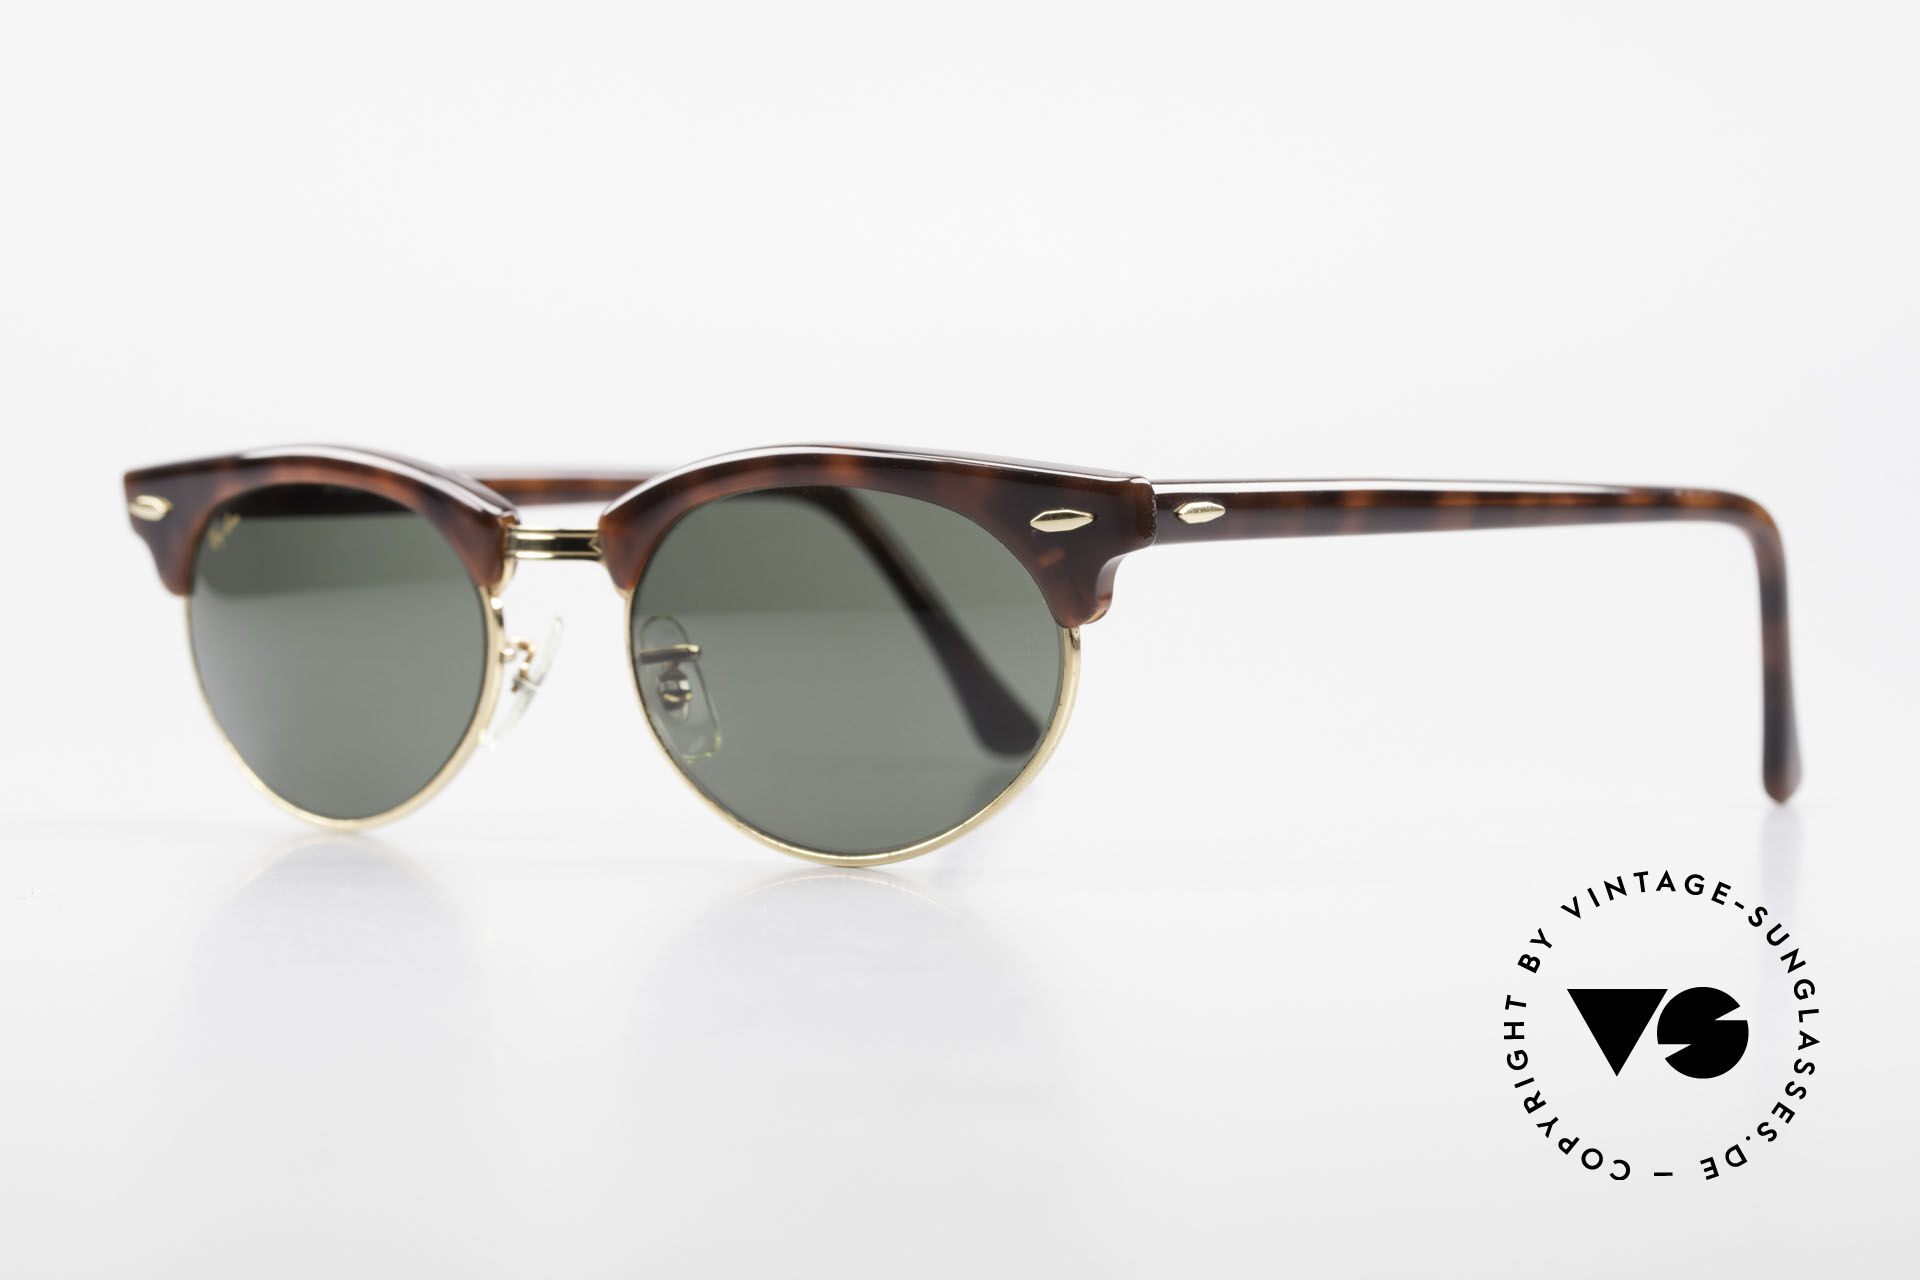 onkruid frequentie schapen Sunglasses Ray Ban Clubmaster Oval 80's Bausch & Lomb Original